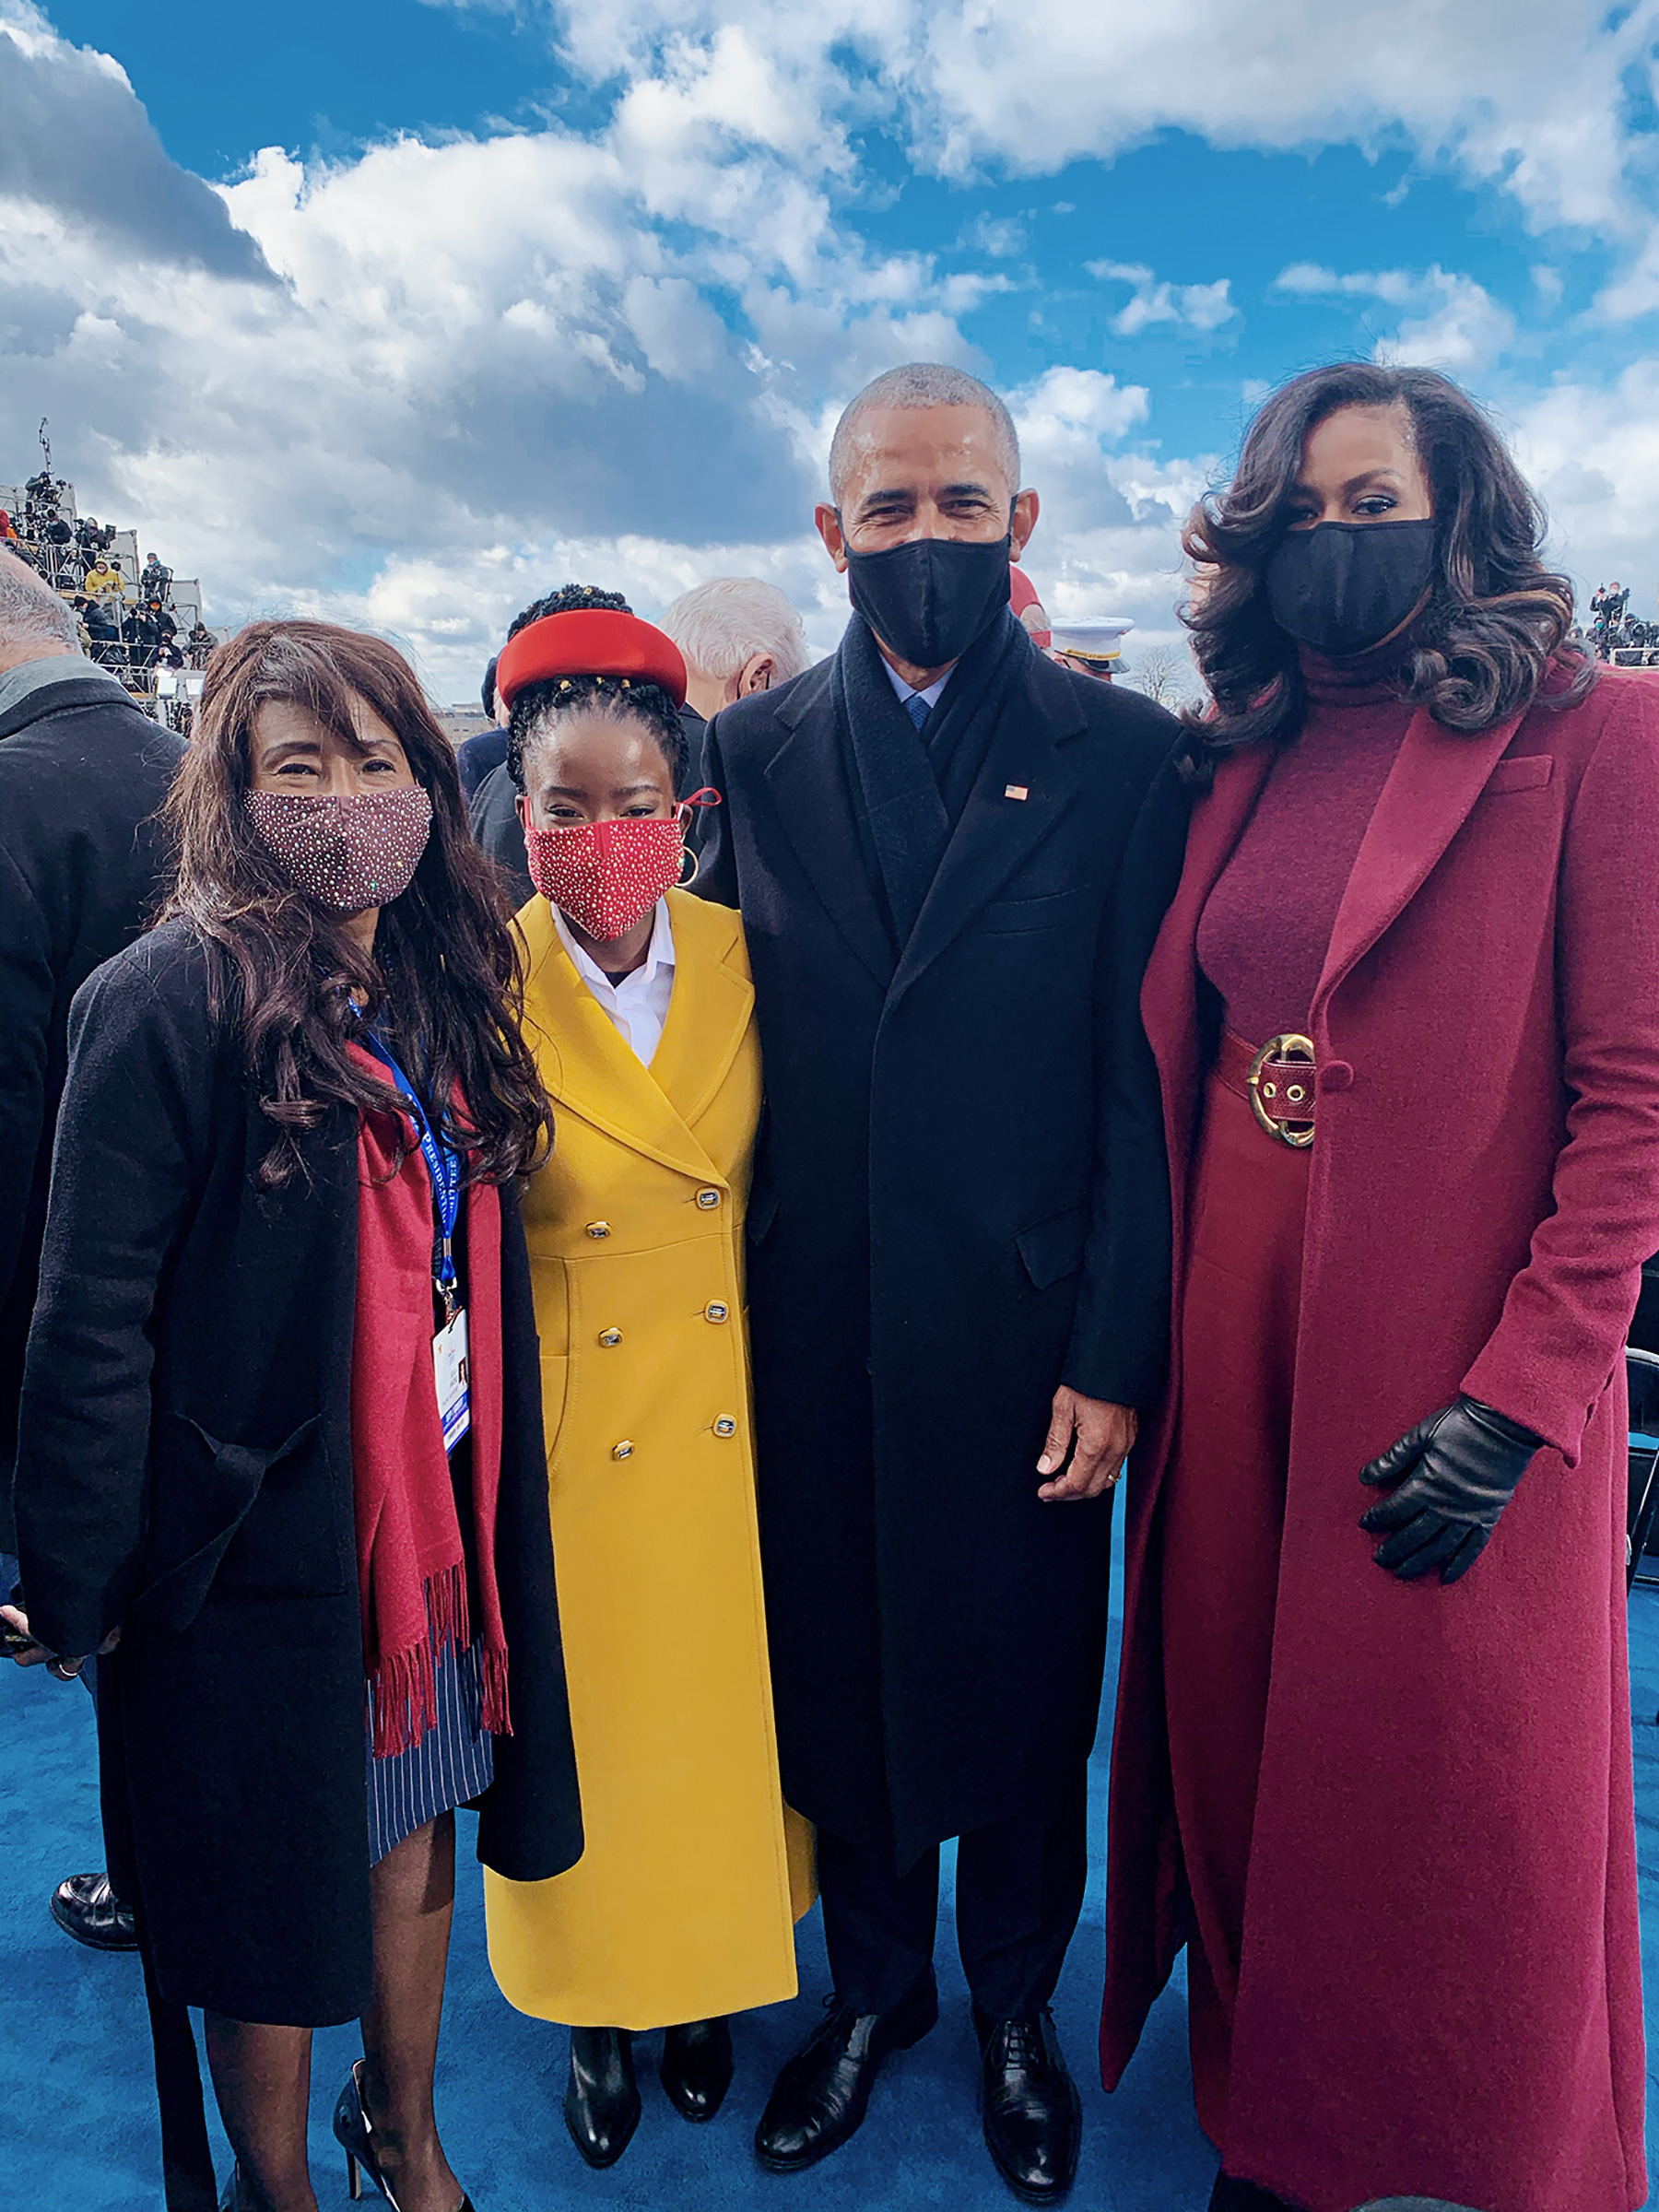 Gorman and her mother Joan Wicks with the Obamas at the Inauguration